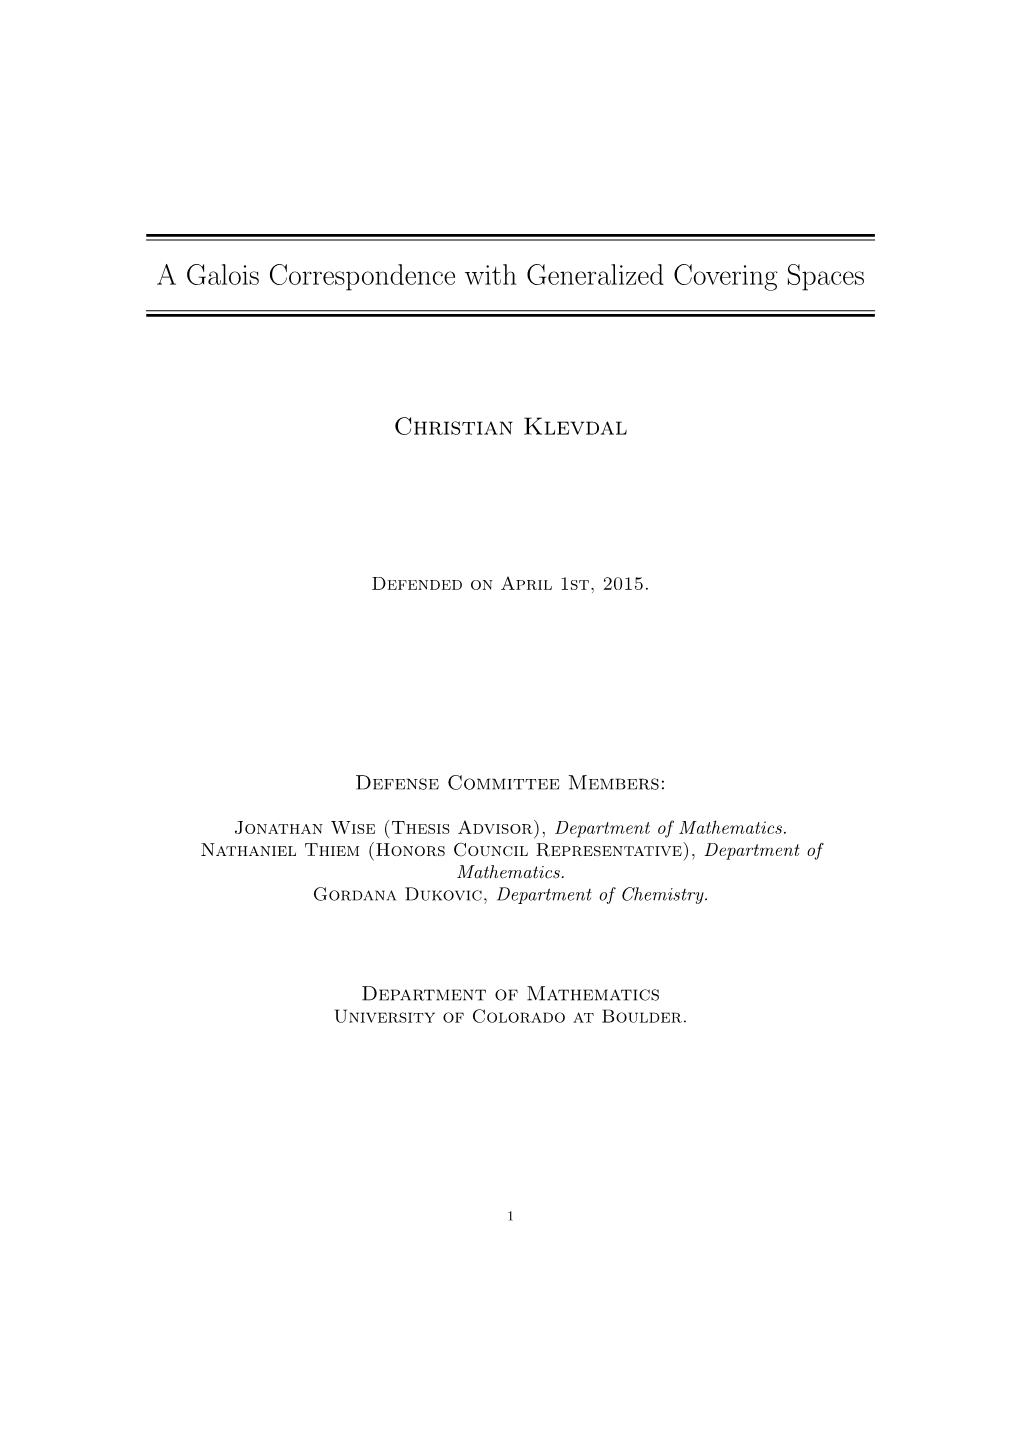 A Galois Correspondence with Generalized Covering Spaces